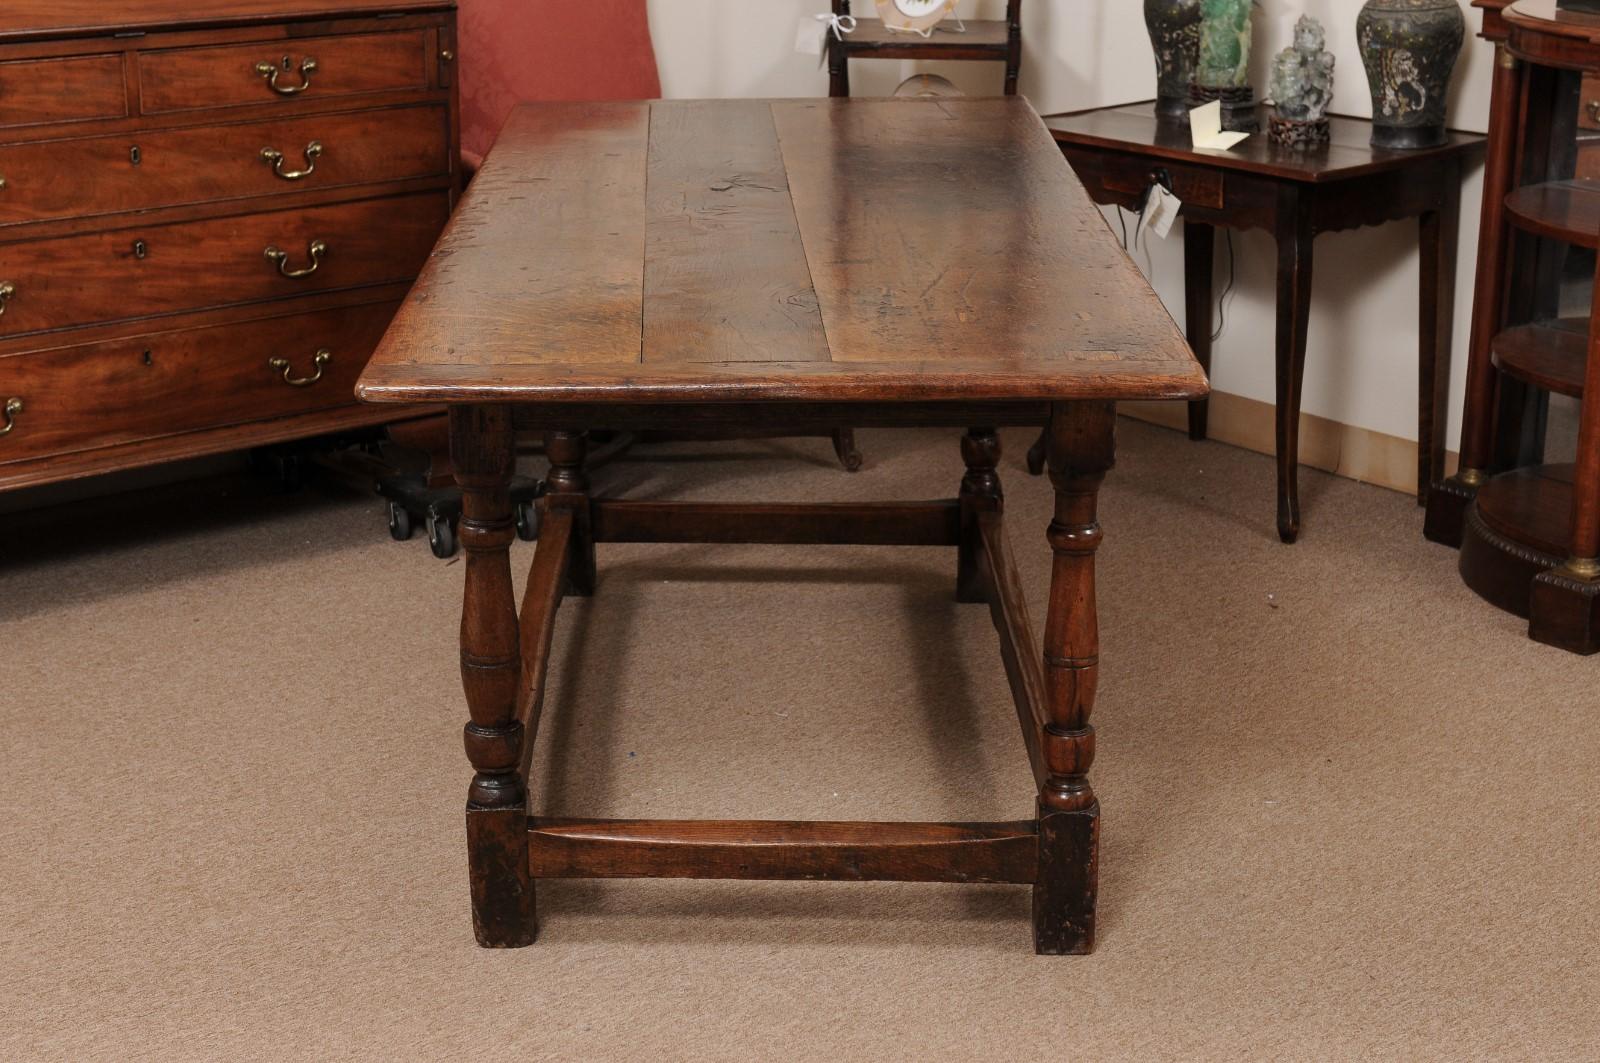  Early 18th Century English Long Oak Hall Table with Carved Frieze, Turned Legs  For Sale 1